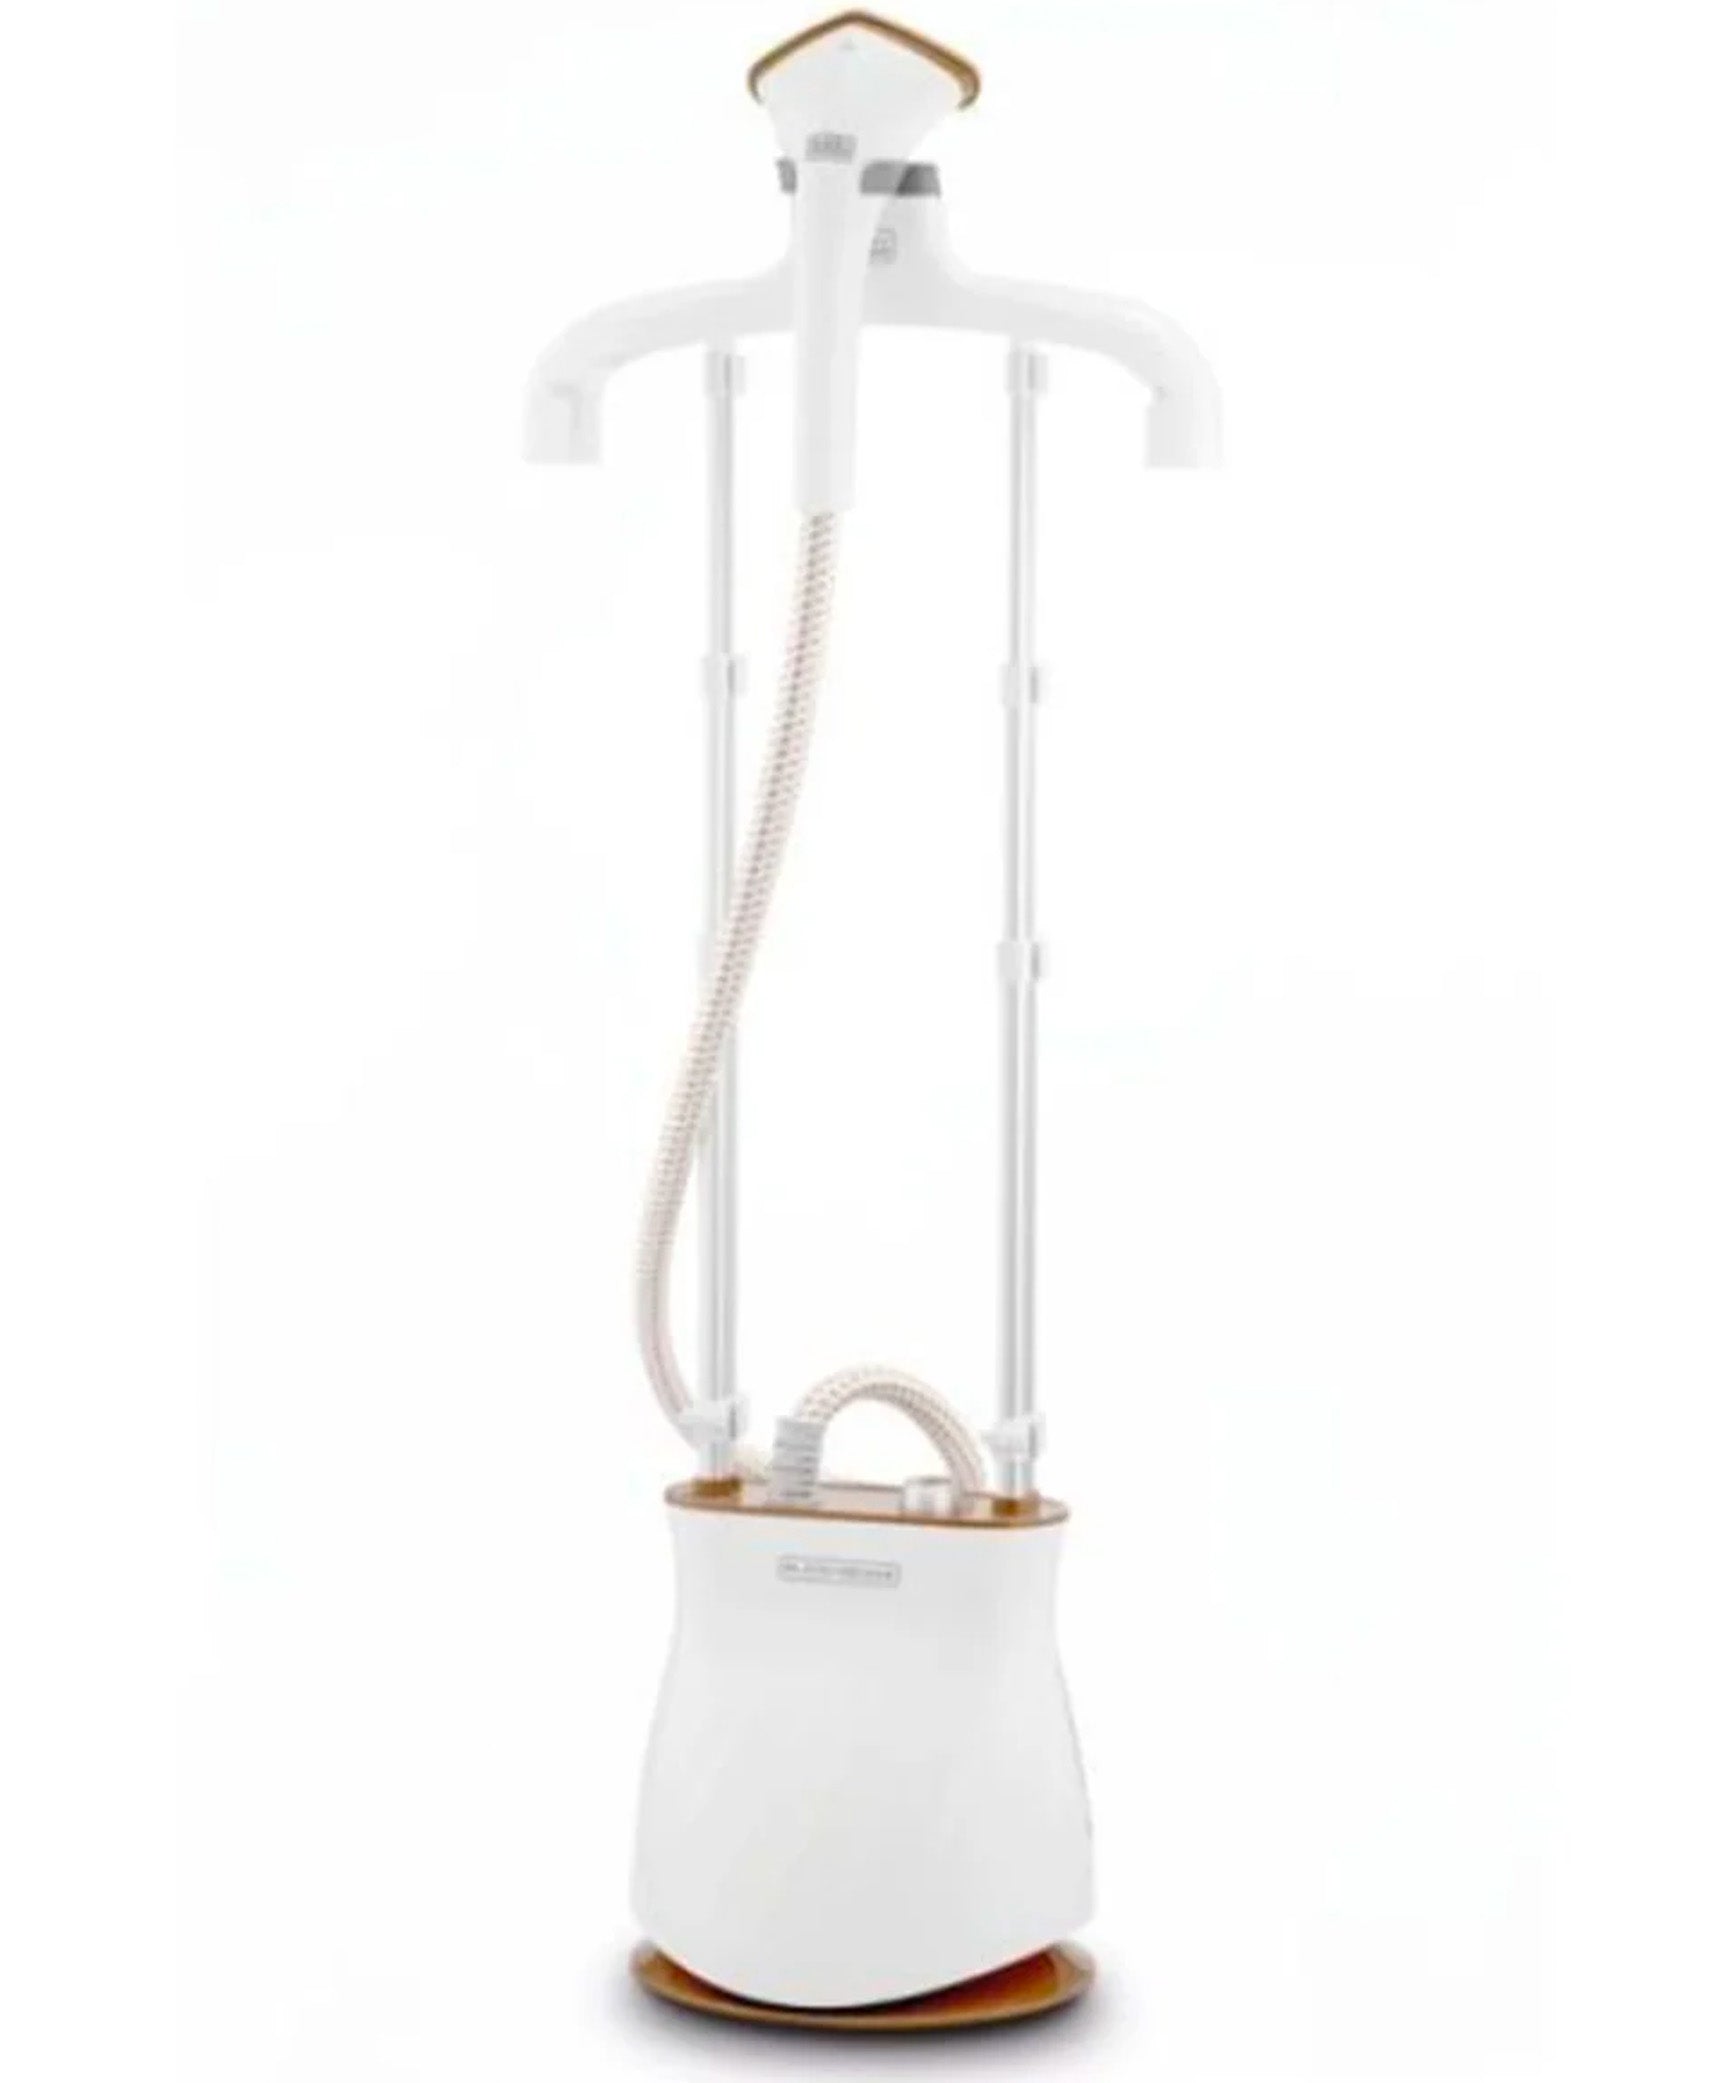 Black+Decker, Garment Steamer with Twin Pole and Ironing Board 1.5 L 2400W White/Gold, GST2400